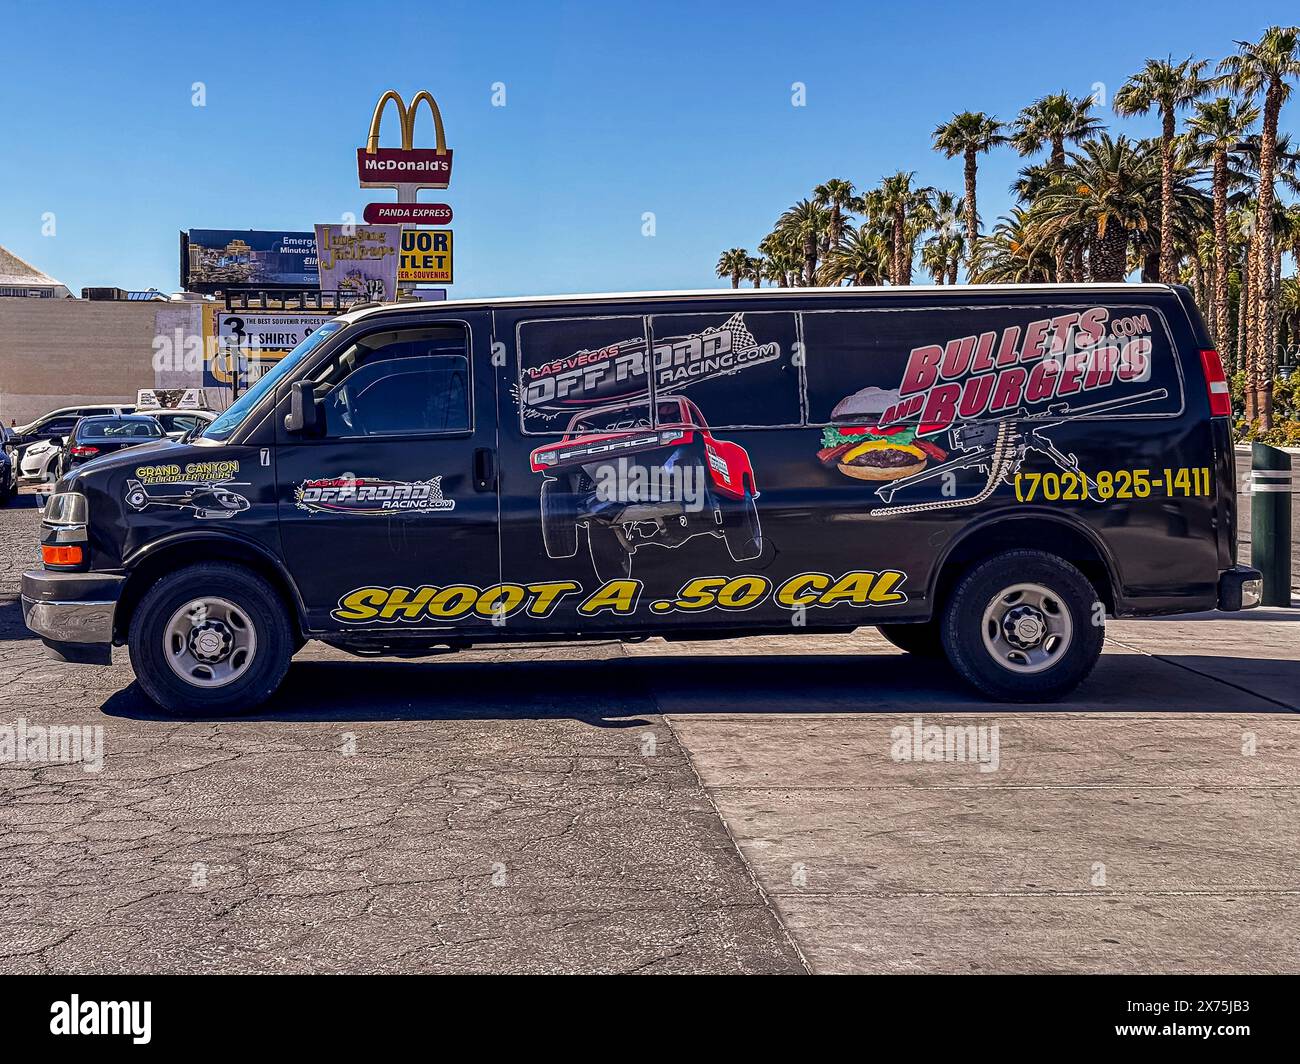 Las Vegas, NV, USA - May 12, 2024: Bullets and Burgers van with promotional colorful machine gun and off-road truck images painted on it. McDonald's s Stock Photo